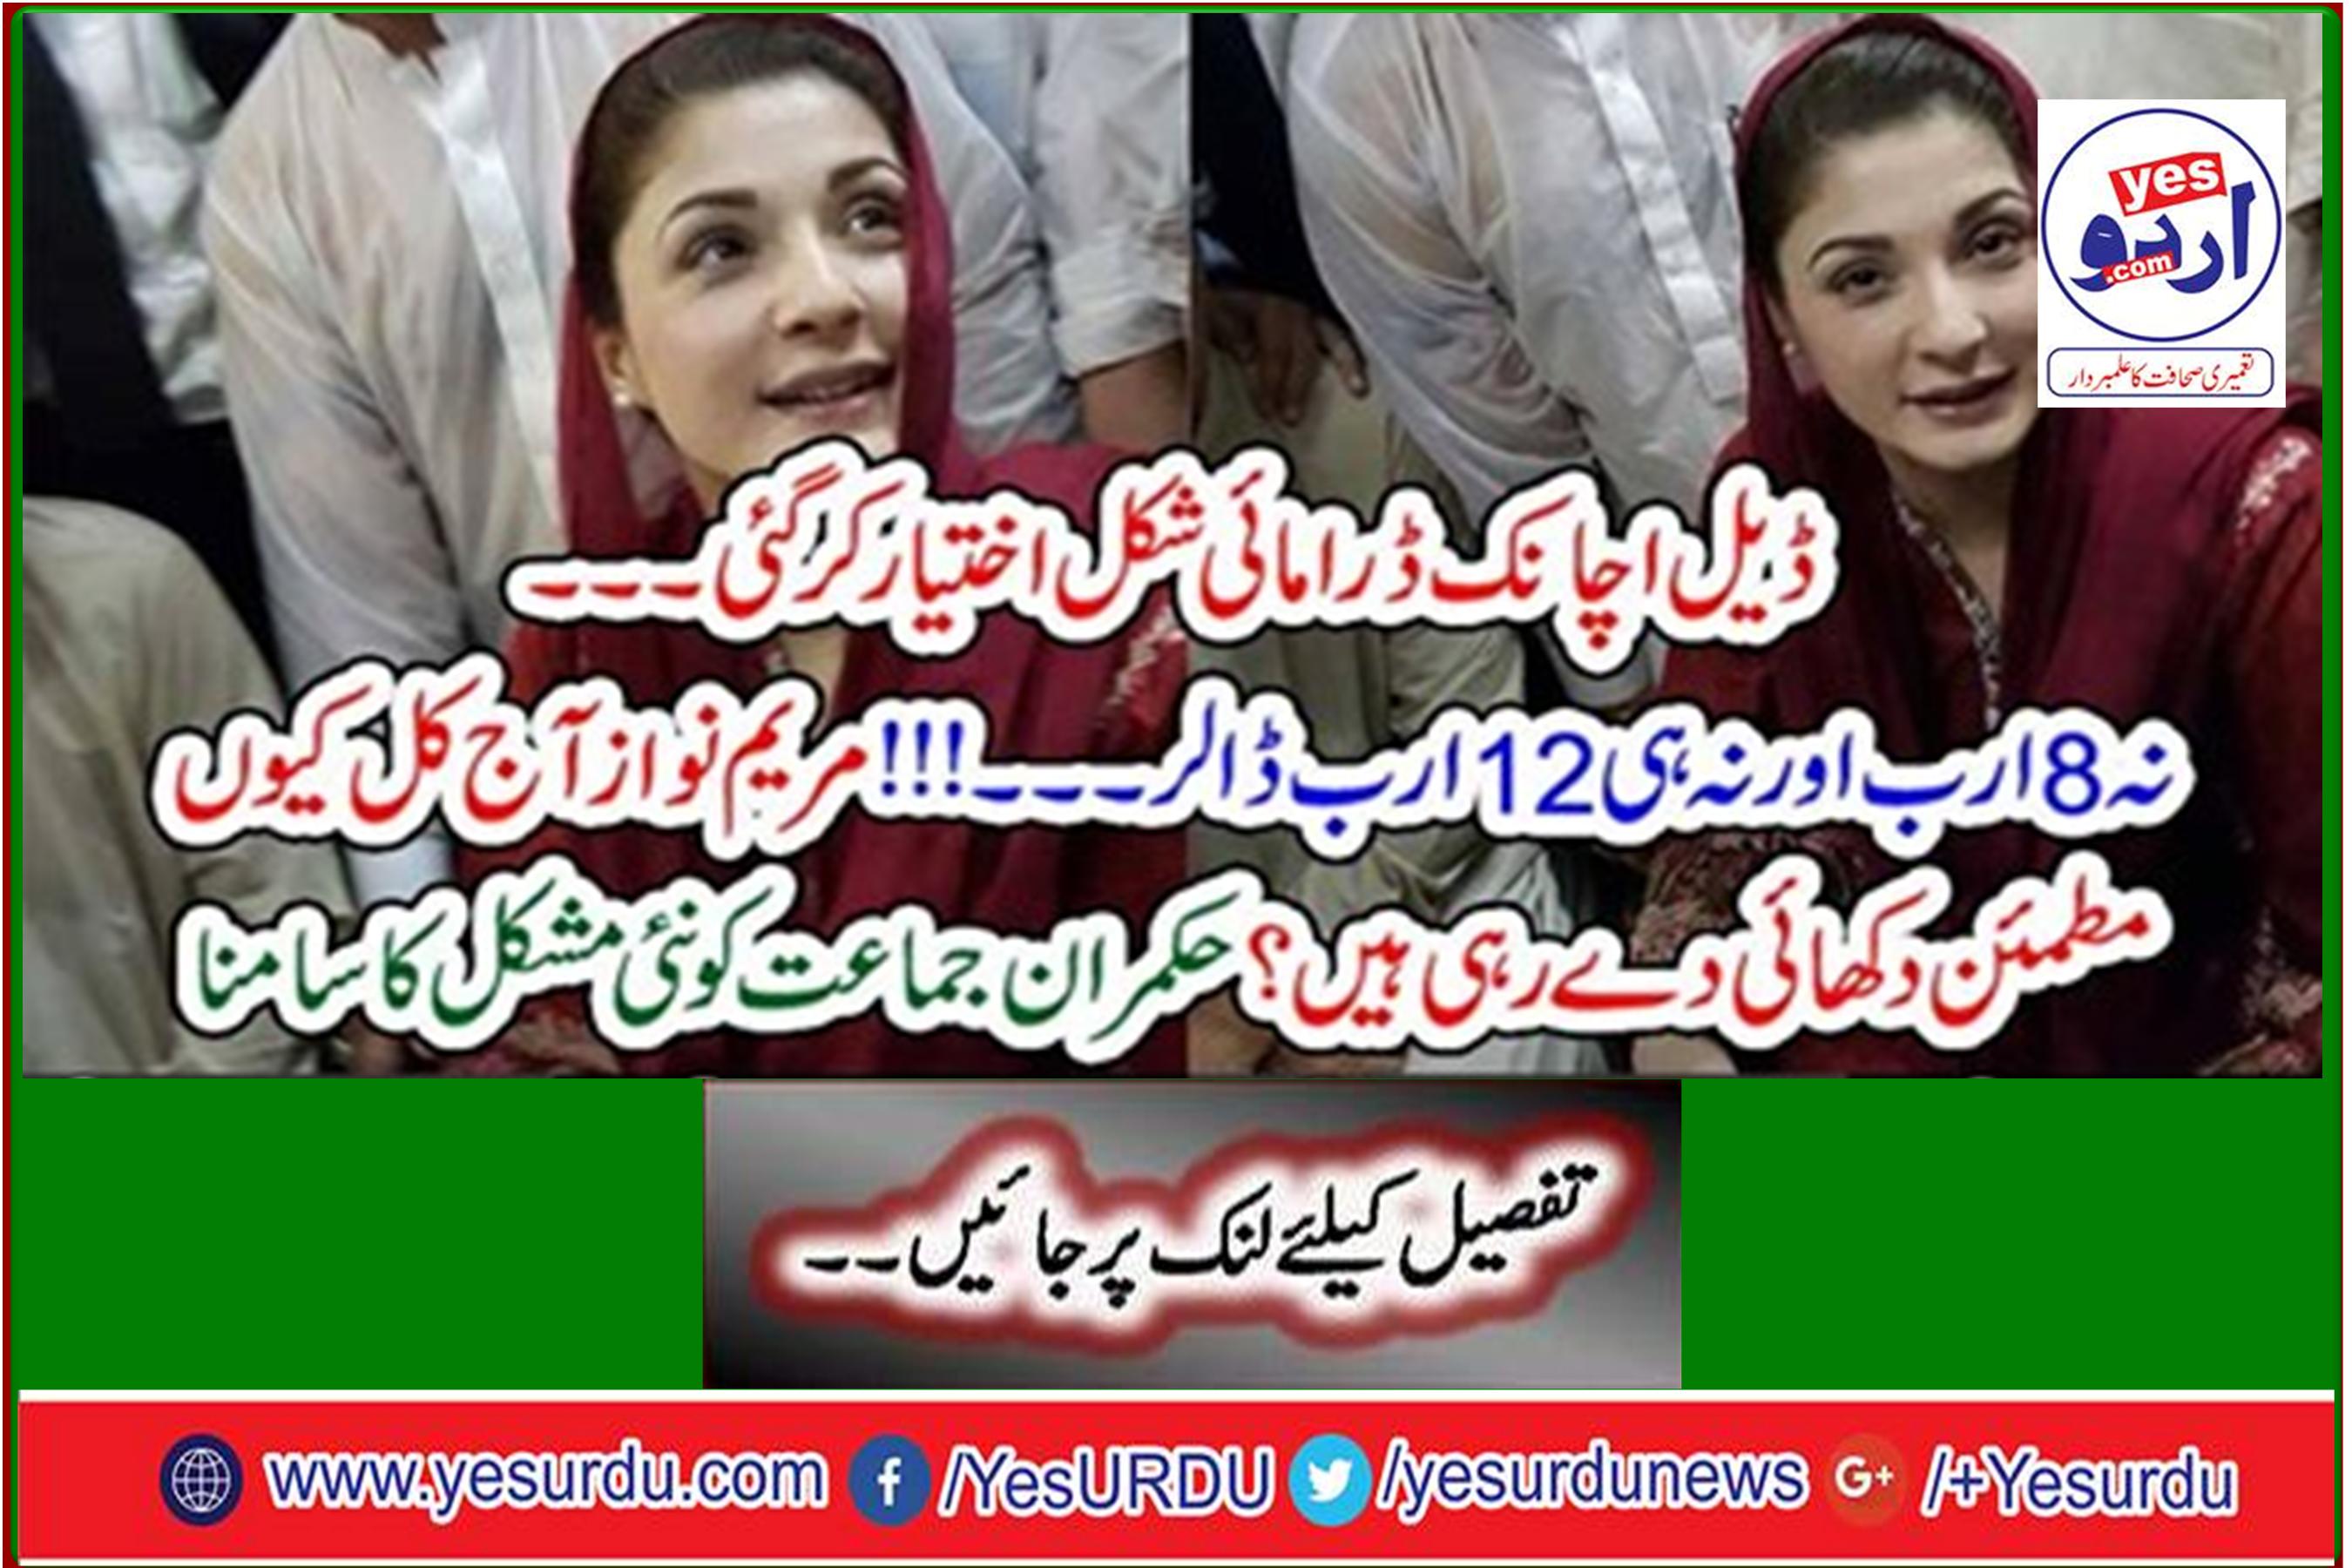 Not $ 8 billion nor $ 12 billion ... !!! Why does Maryam Nawaz seem satisfied today? The ruling party faces new difficulty